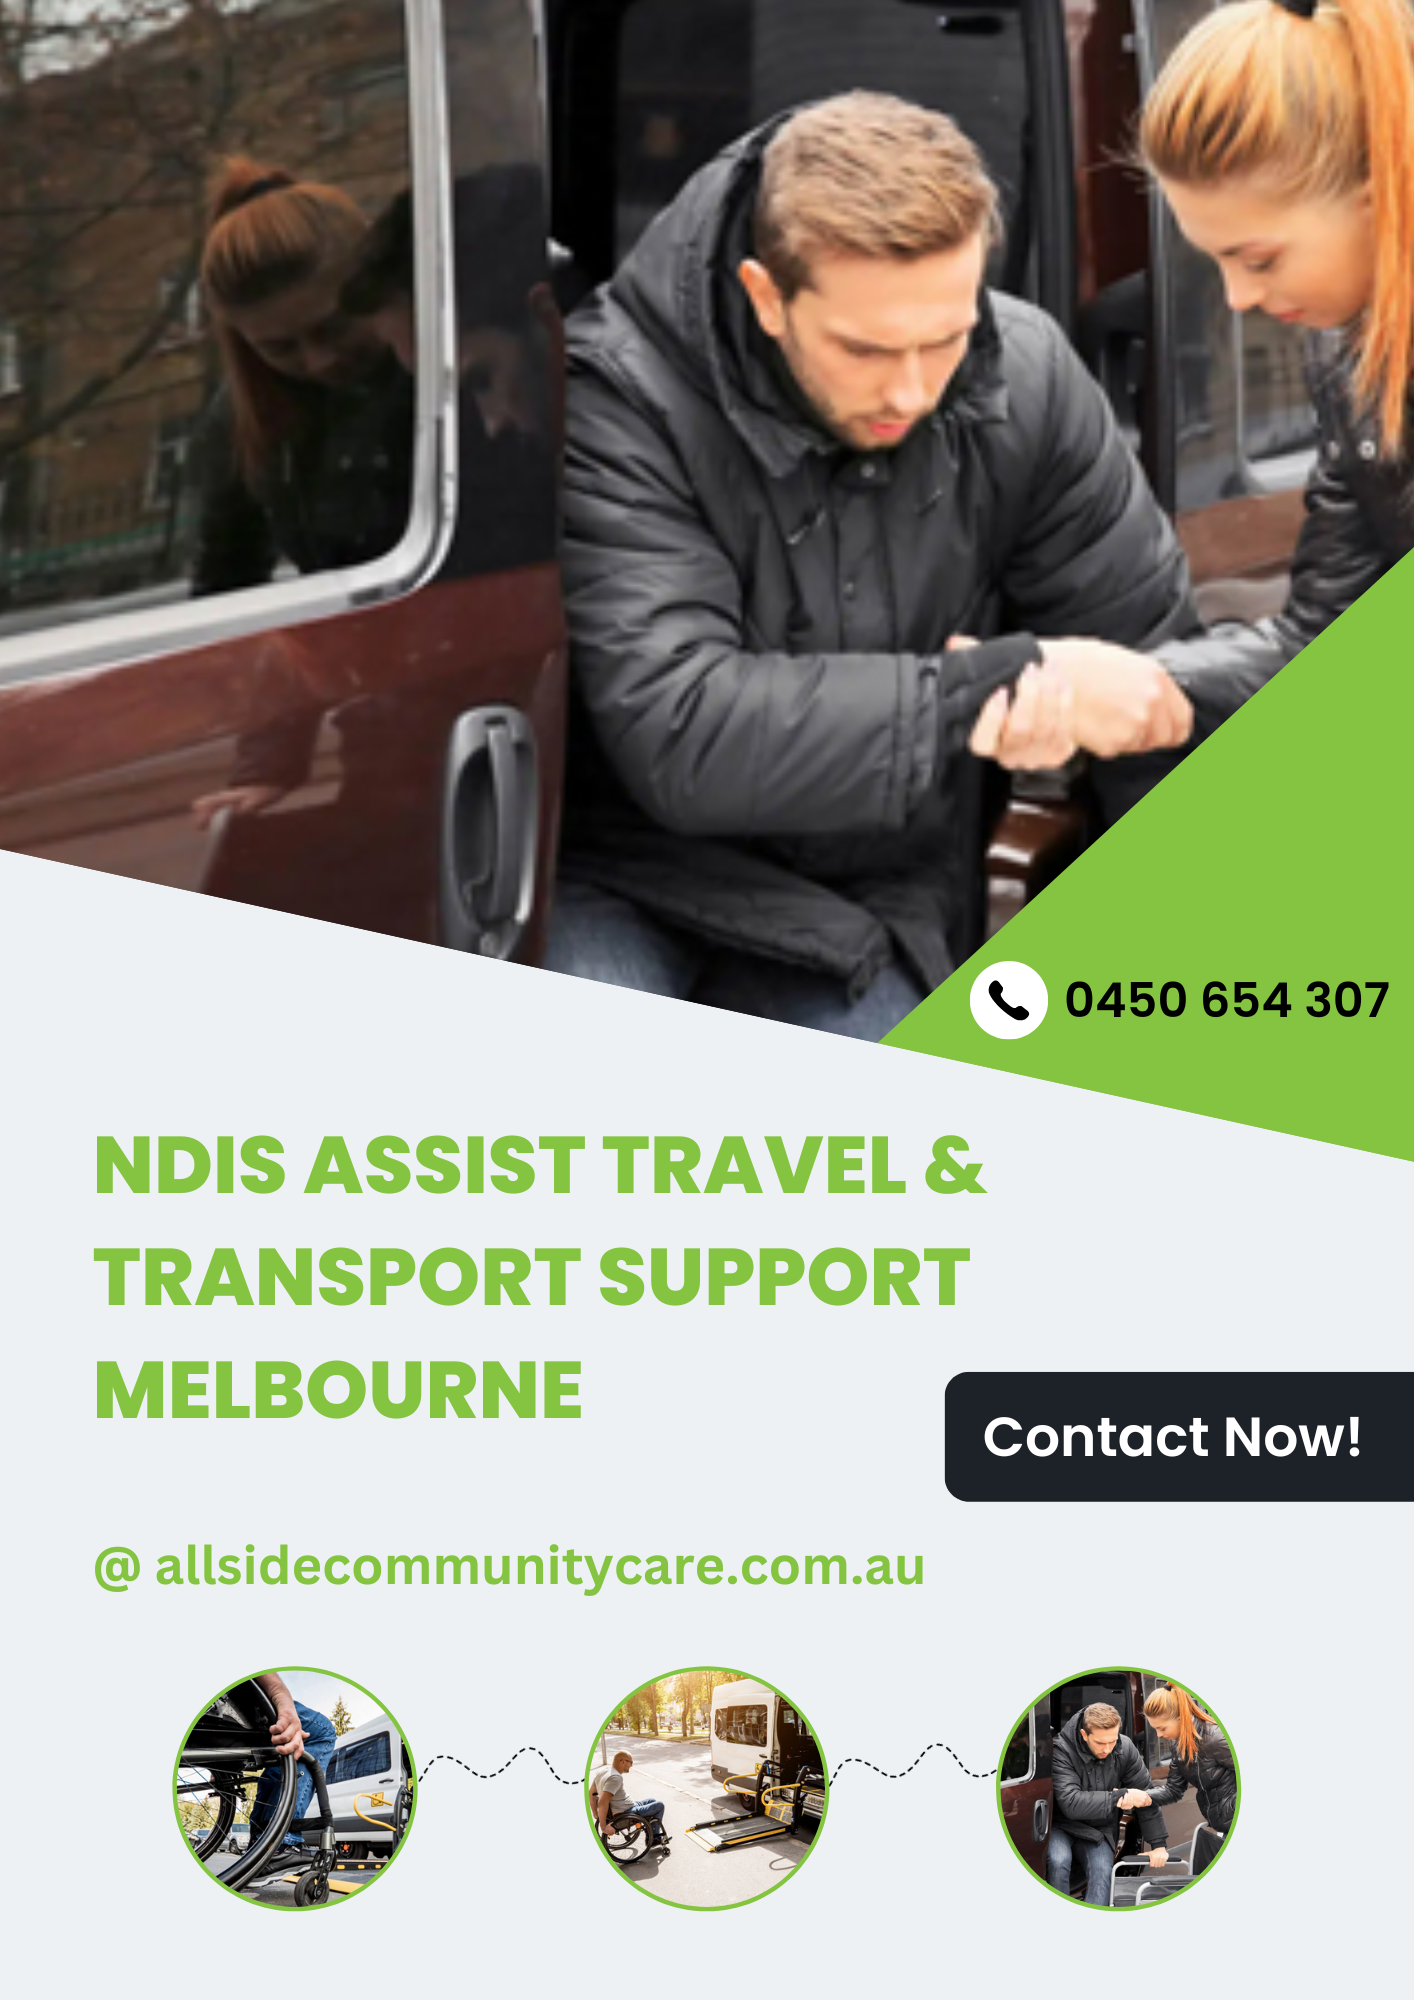 NDIS Assist Travel & Transport Support Melbourne